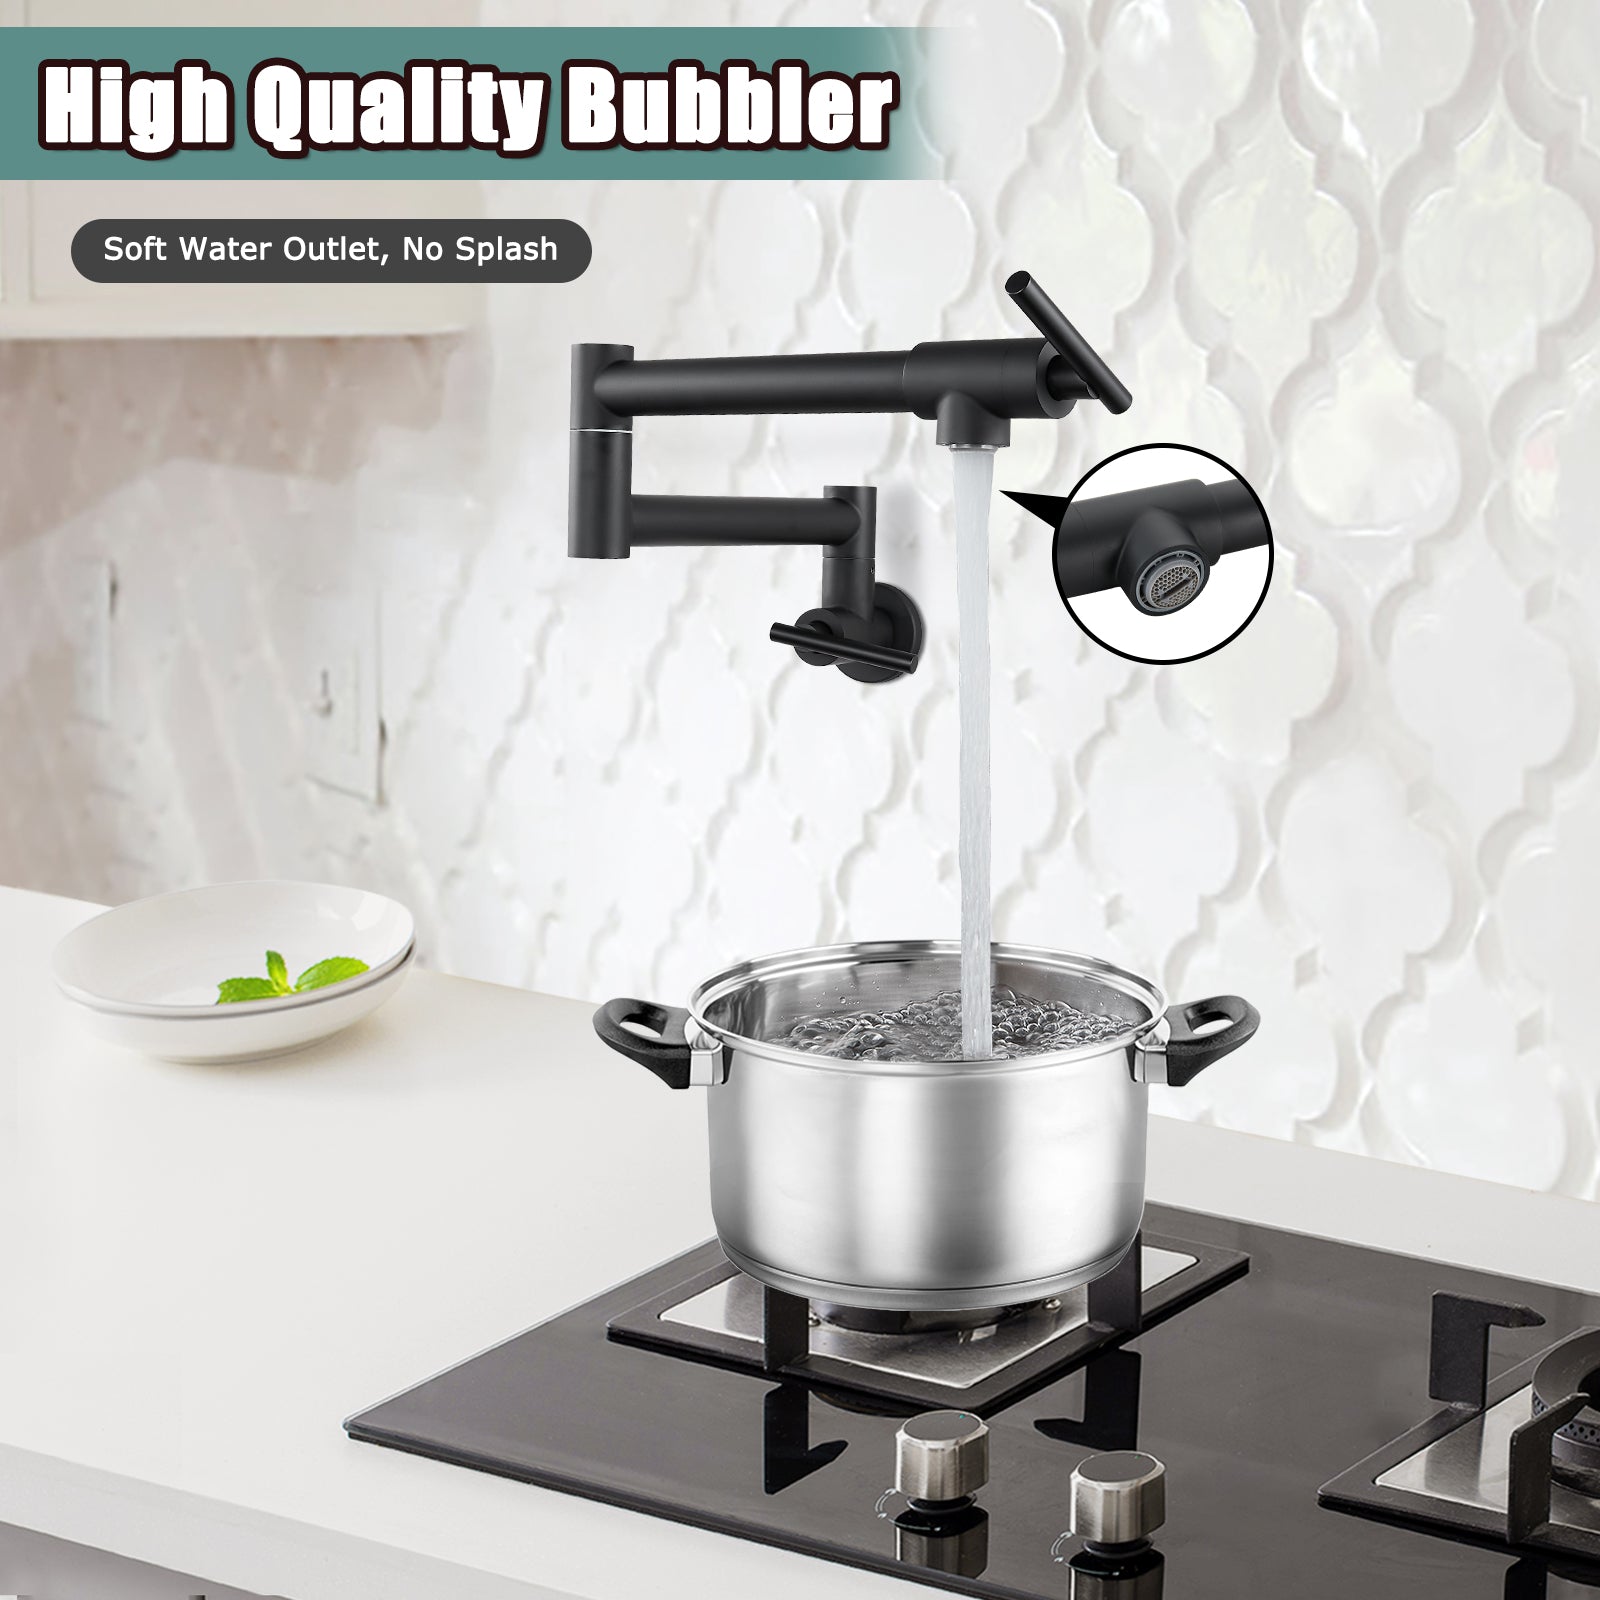 Heyalan 19" Stainless Steel SUS304 Pot Filler Faucet Wall Mounted Double Joint Swing Folding Arms with Two Handles Single Hole Commercial Kitchen Sink Faucet to Control Water Stovetop